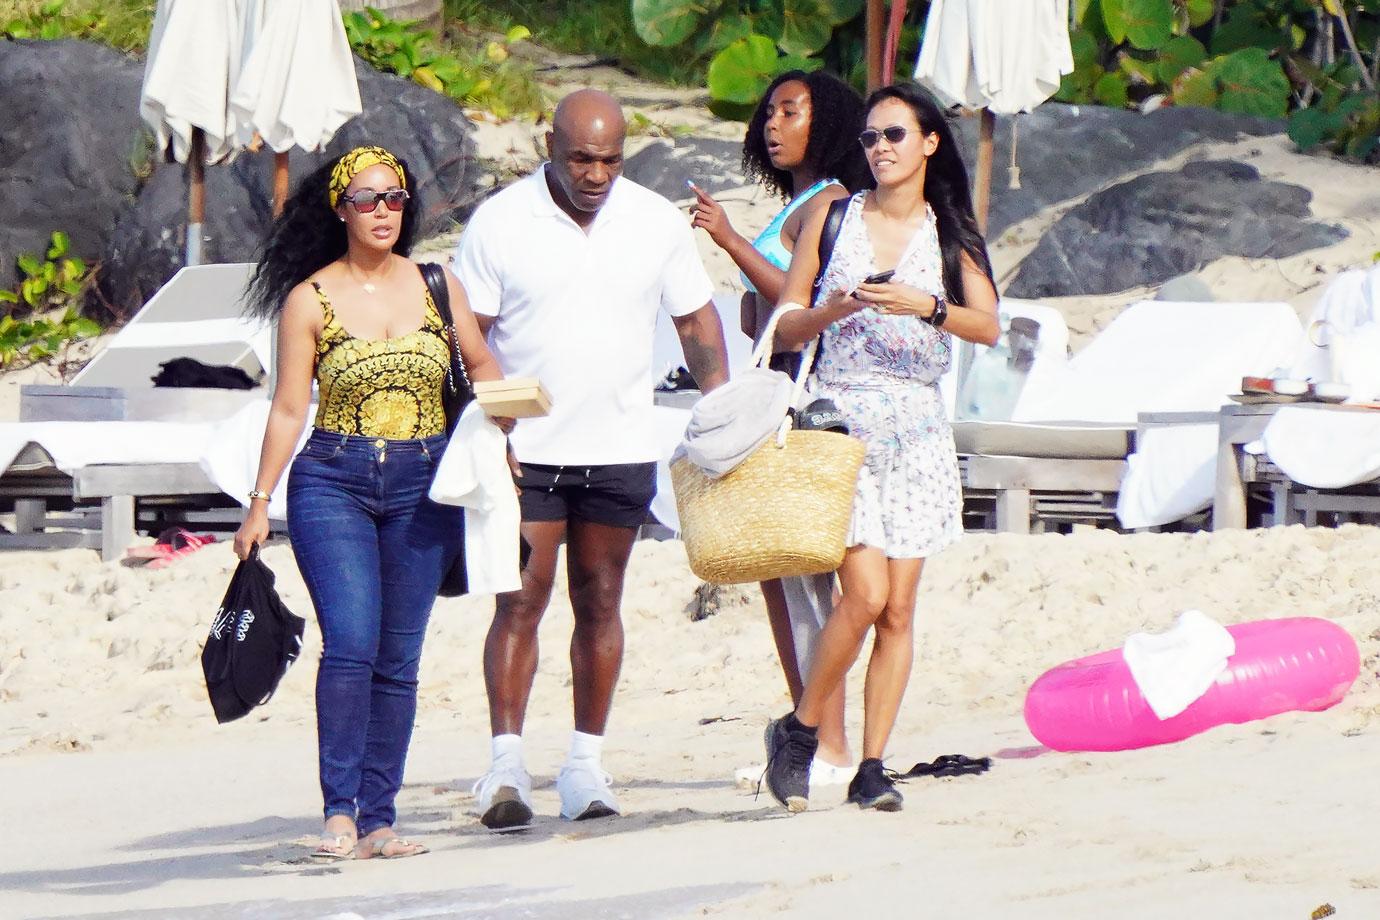 mike tyson beach family st barts boxer spend time sun loved ones holiday season r